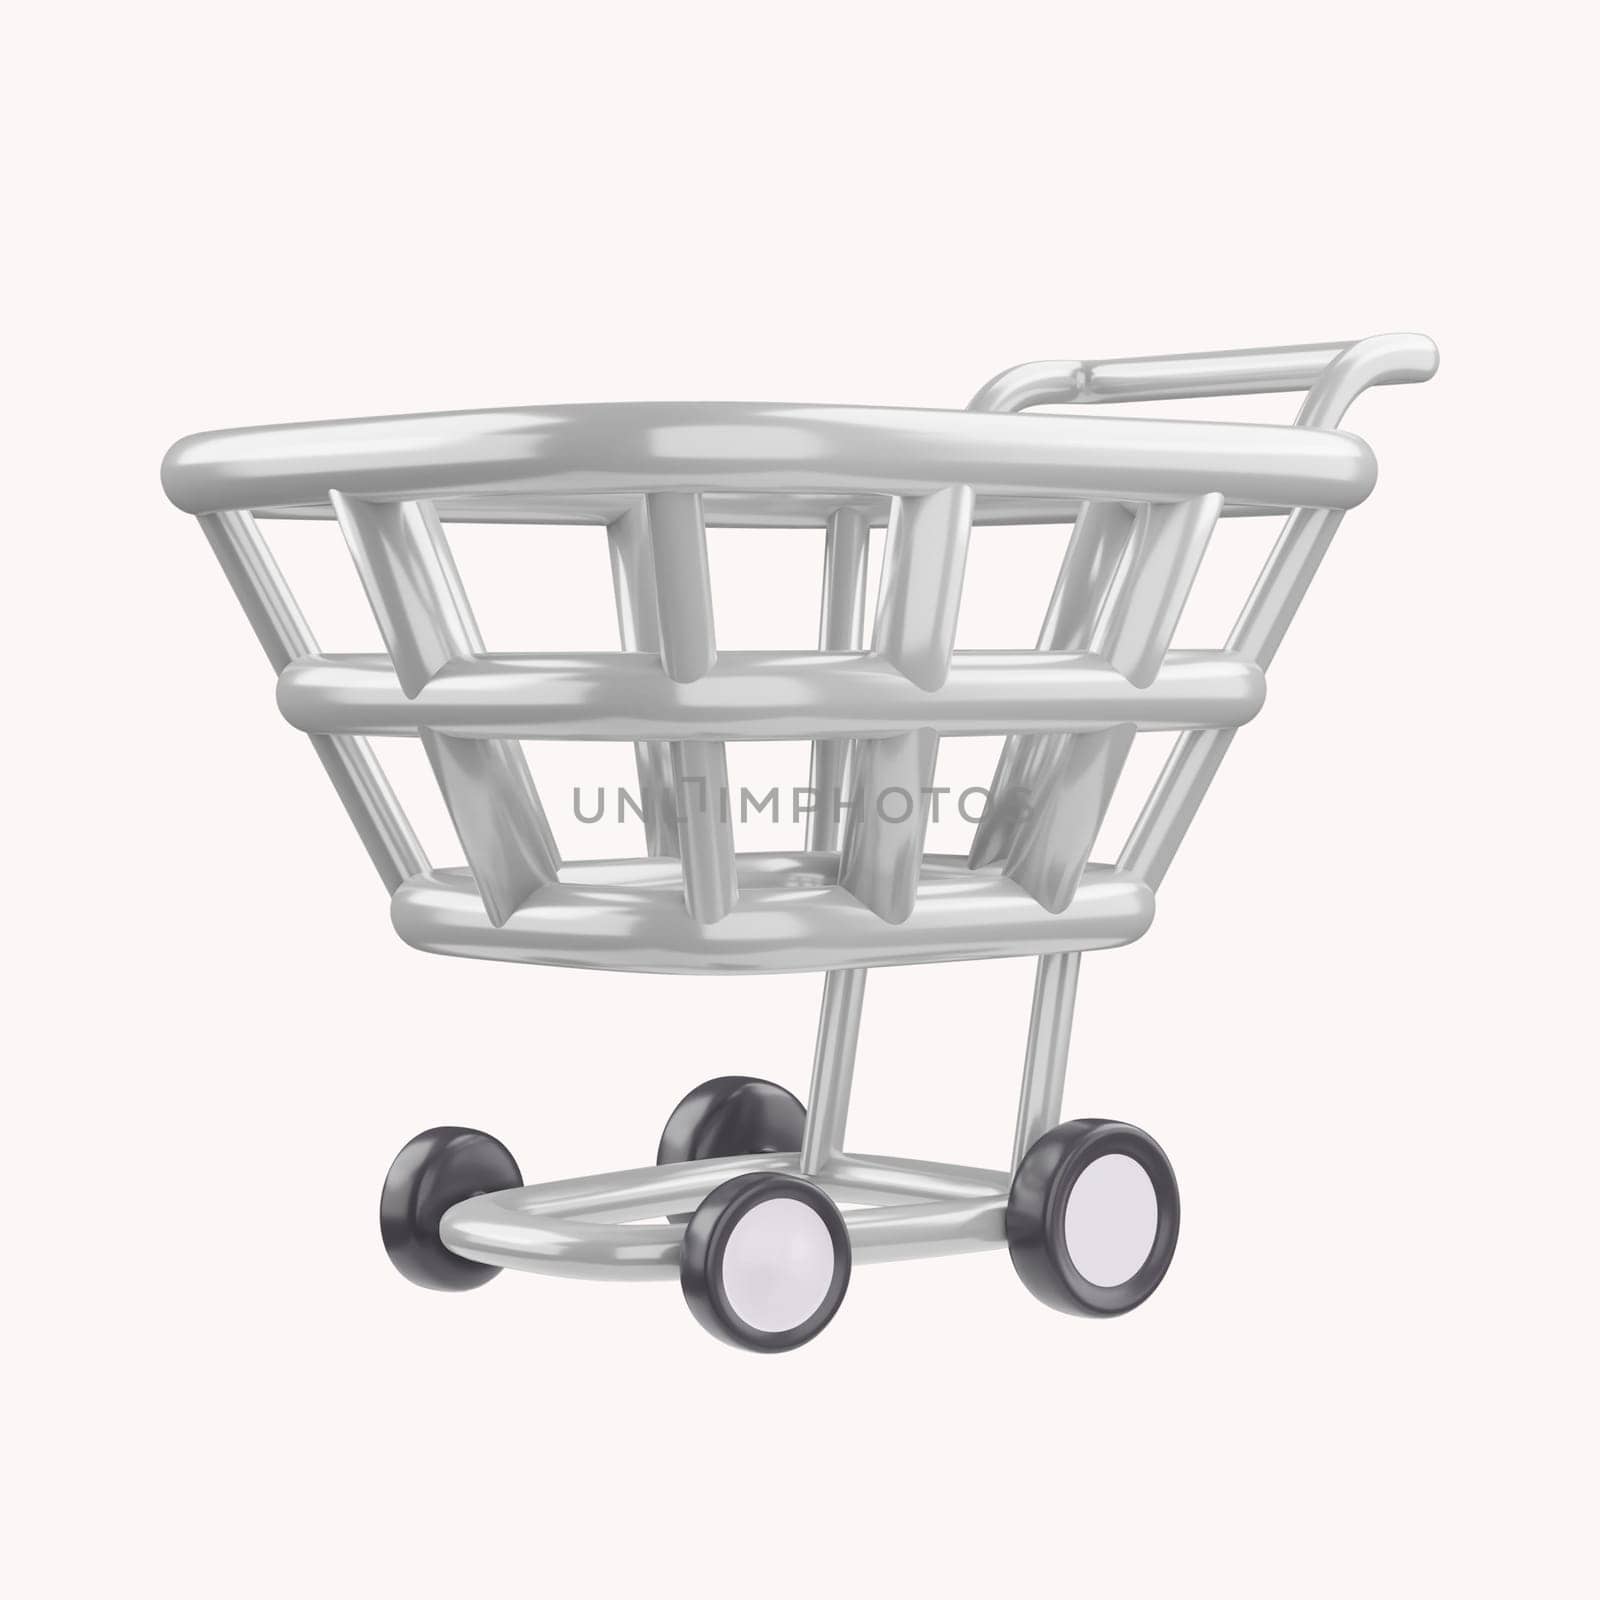 3D shopping cart for online shopping and digital marketing ideas on white isolate background.